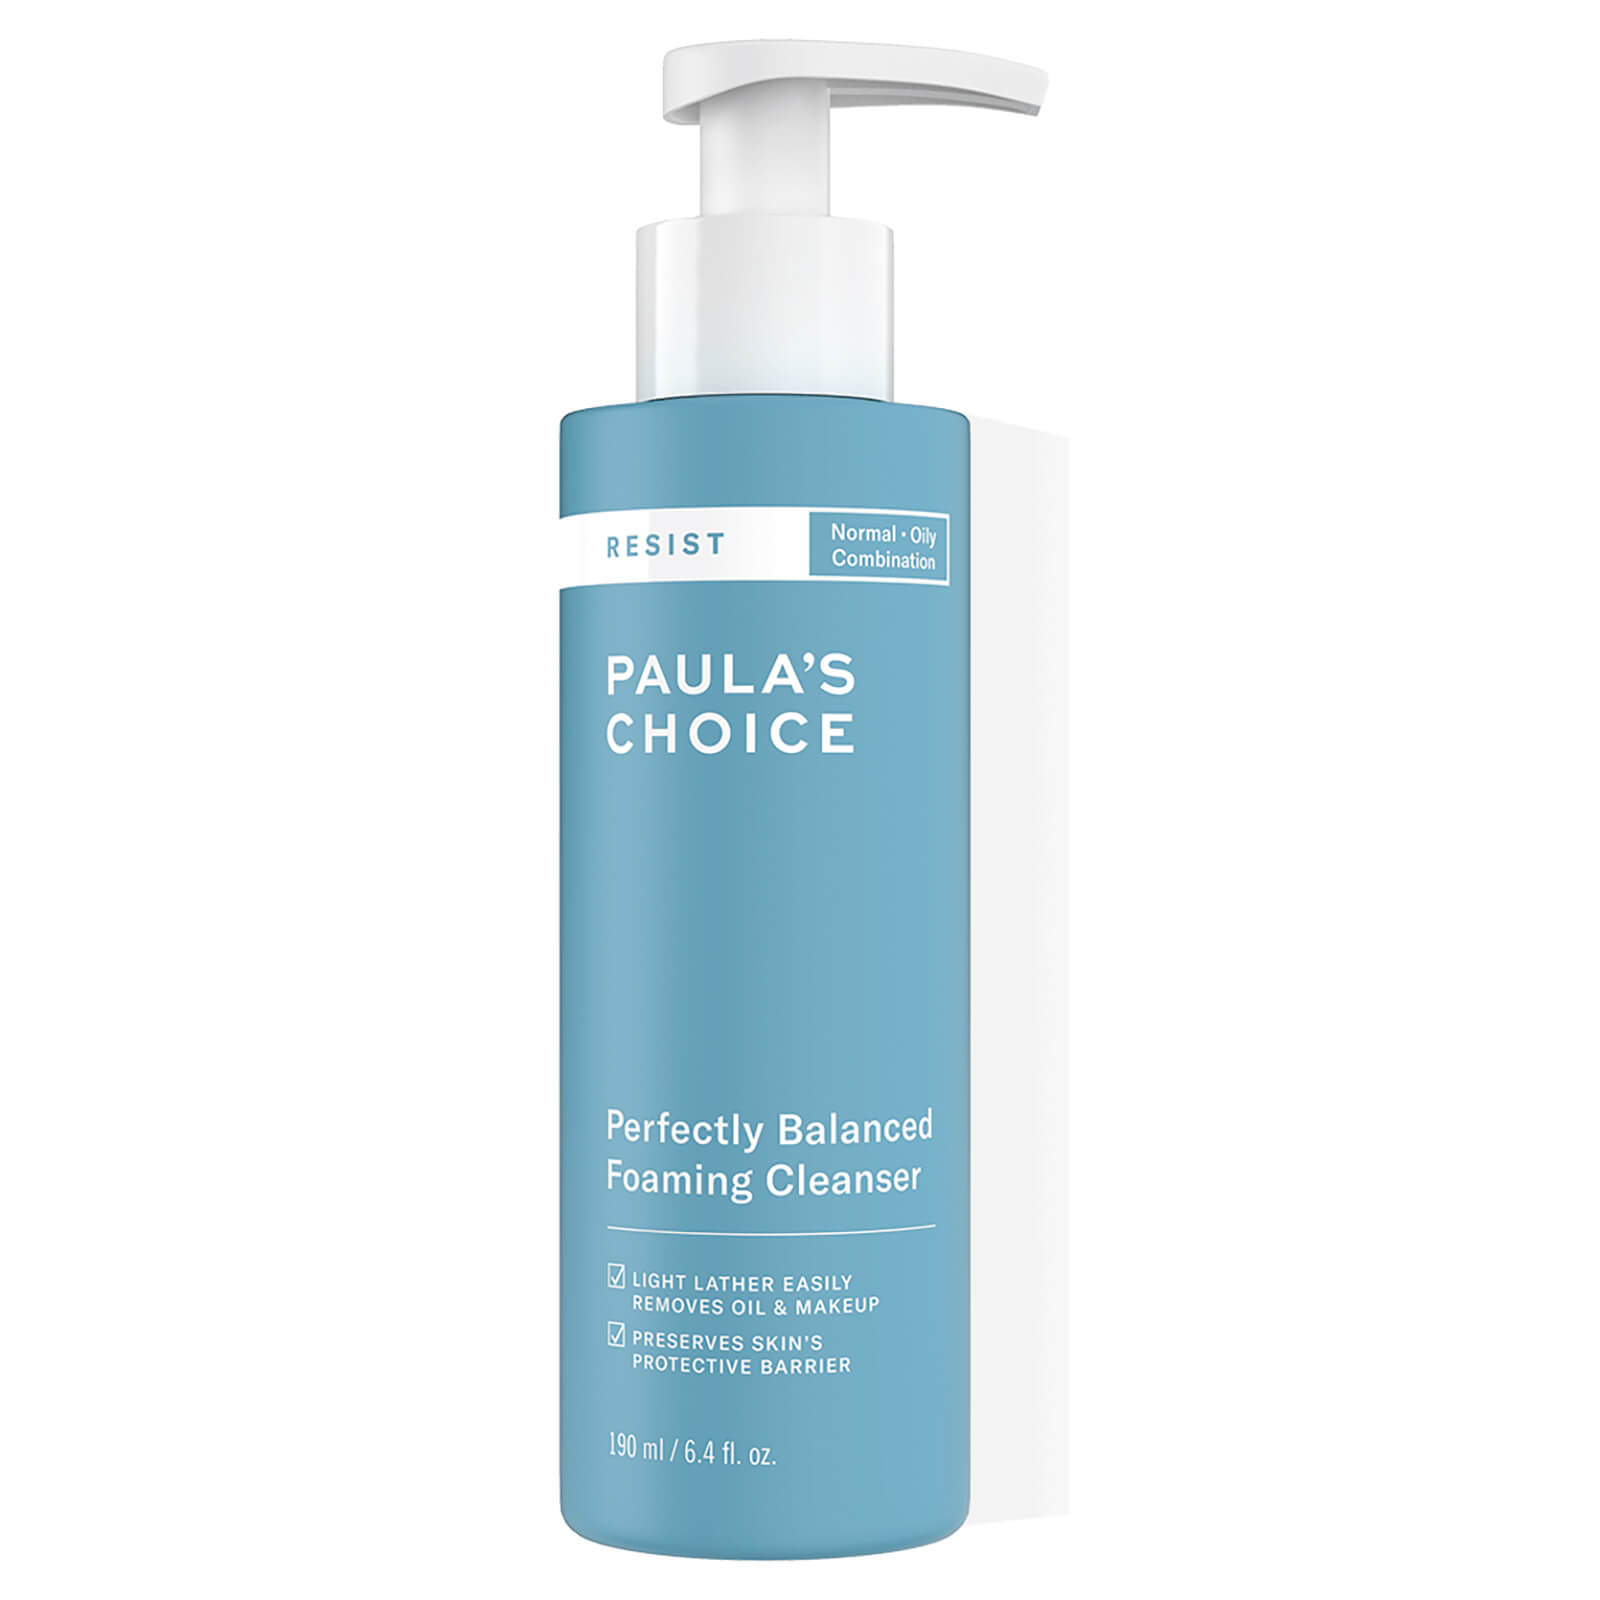 paula's choice cleanser review